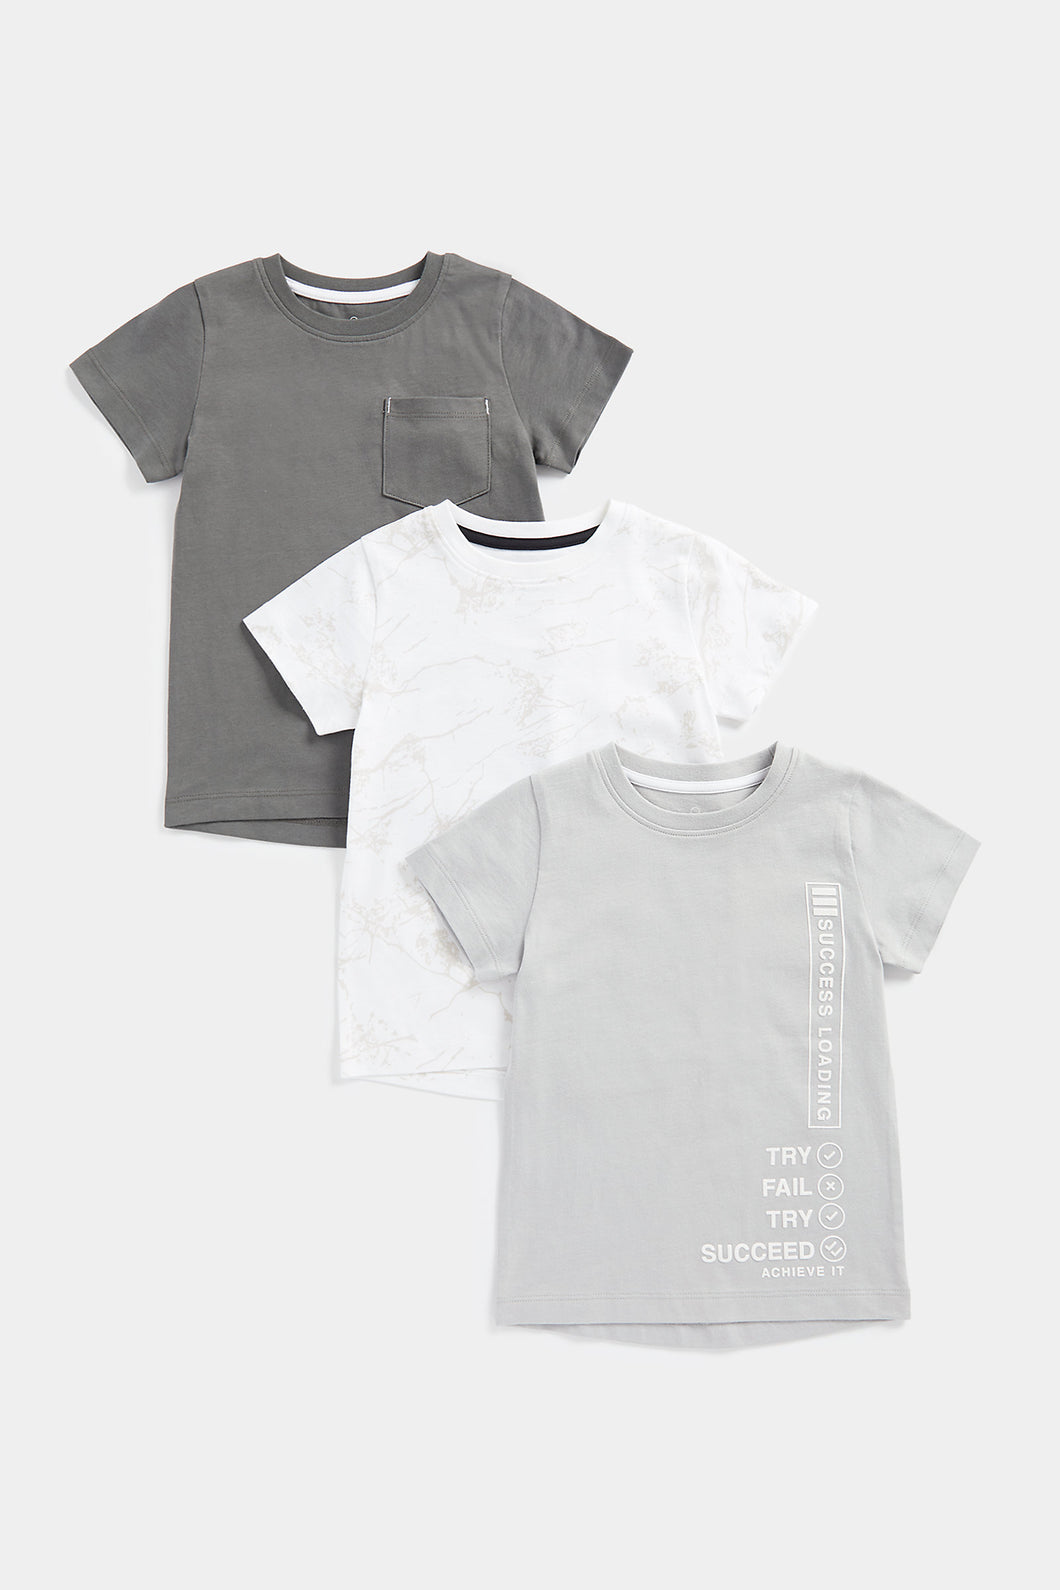 Mothercare Success T-Shirts - 3 Pack